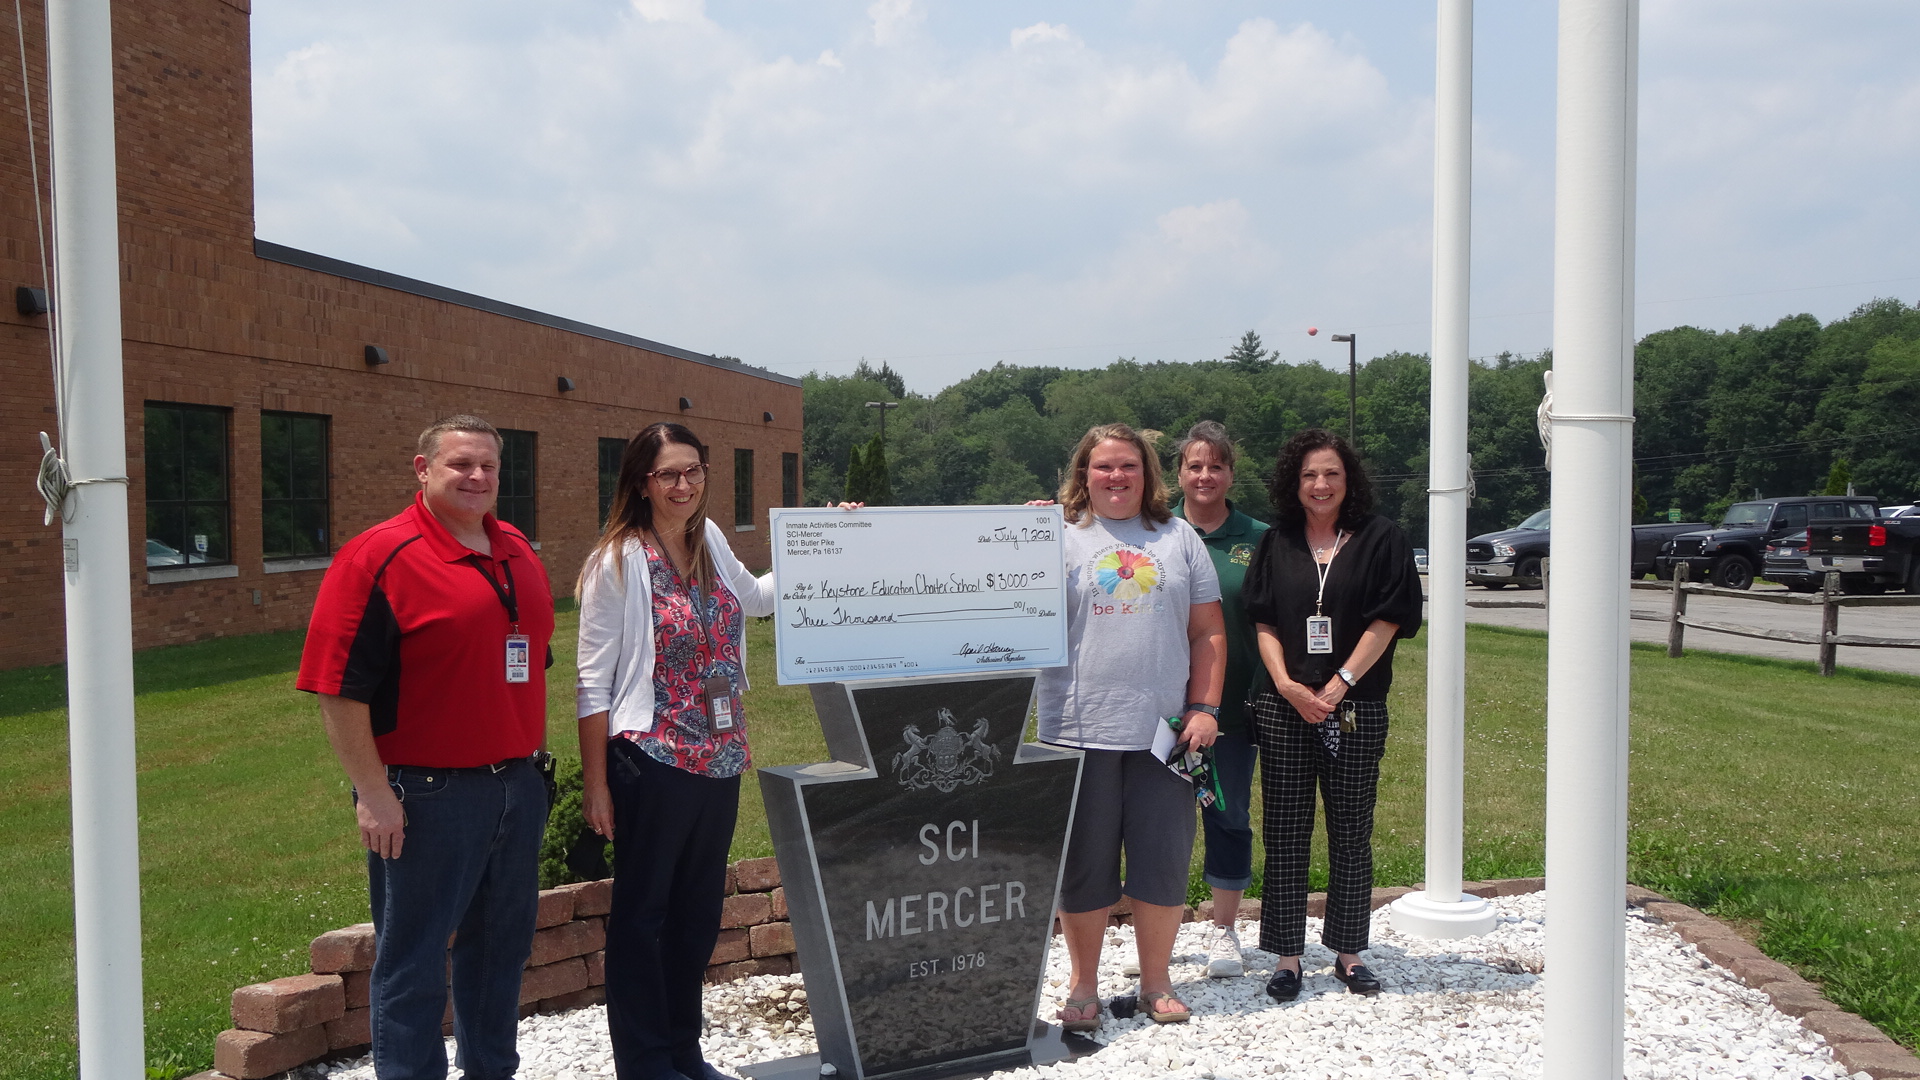 SCI Mercer staff present Keystone Education Center staff with a check